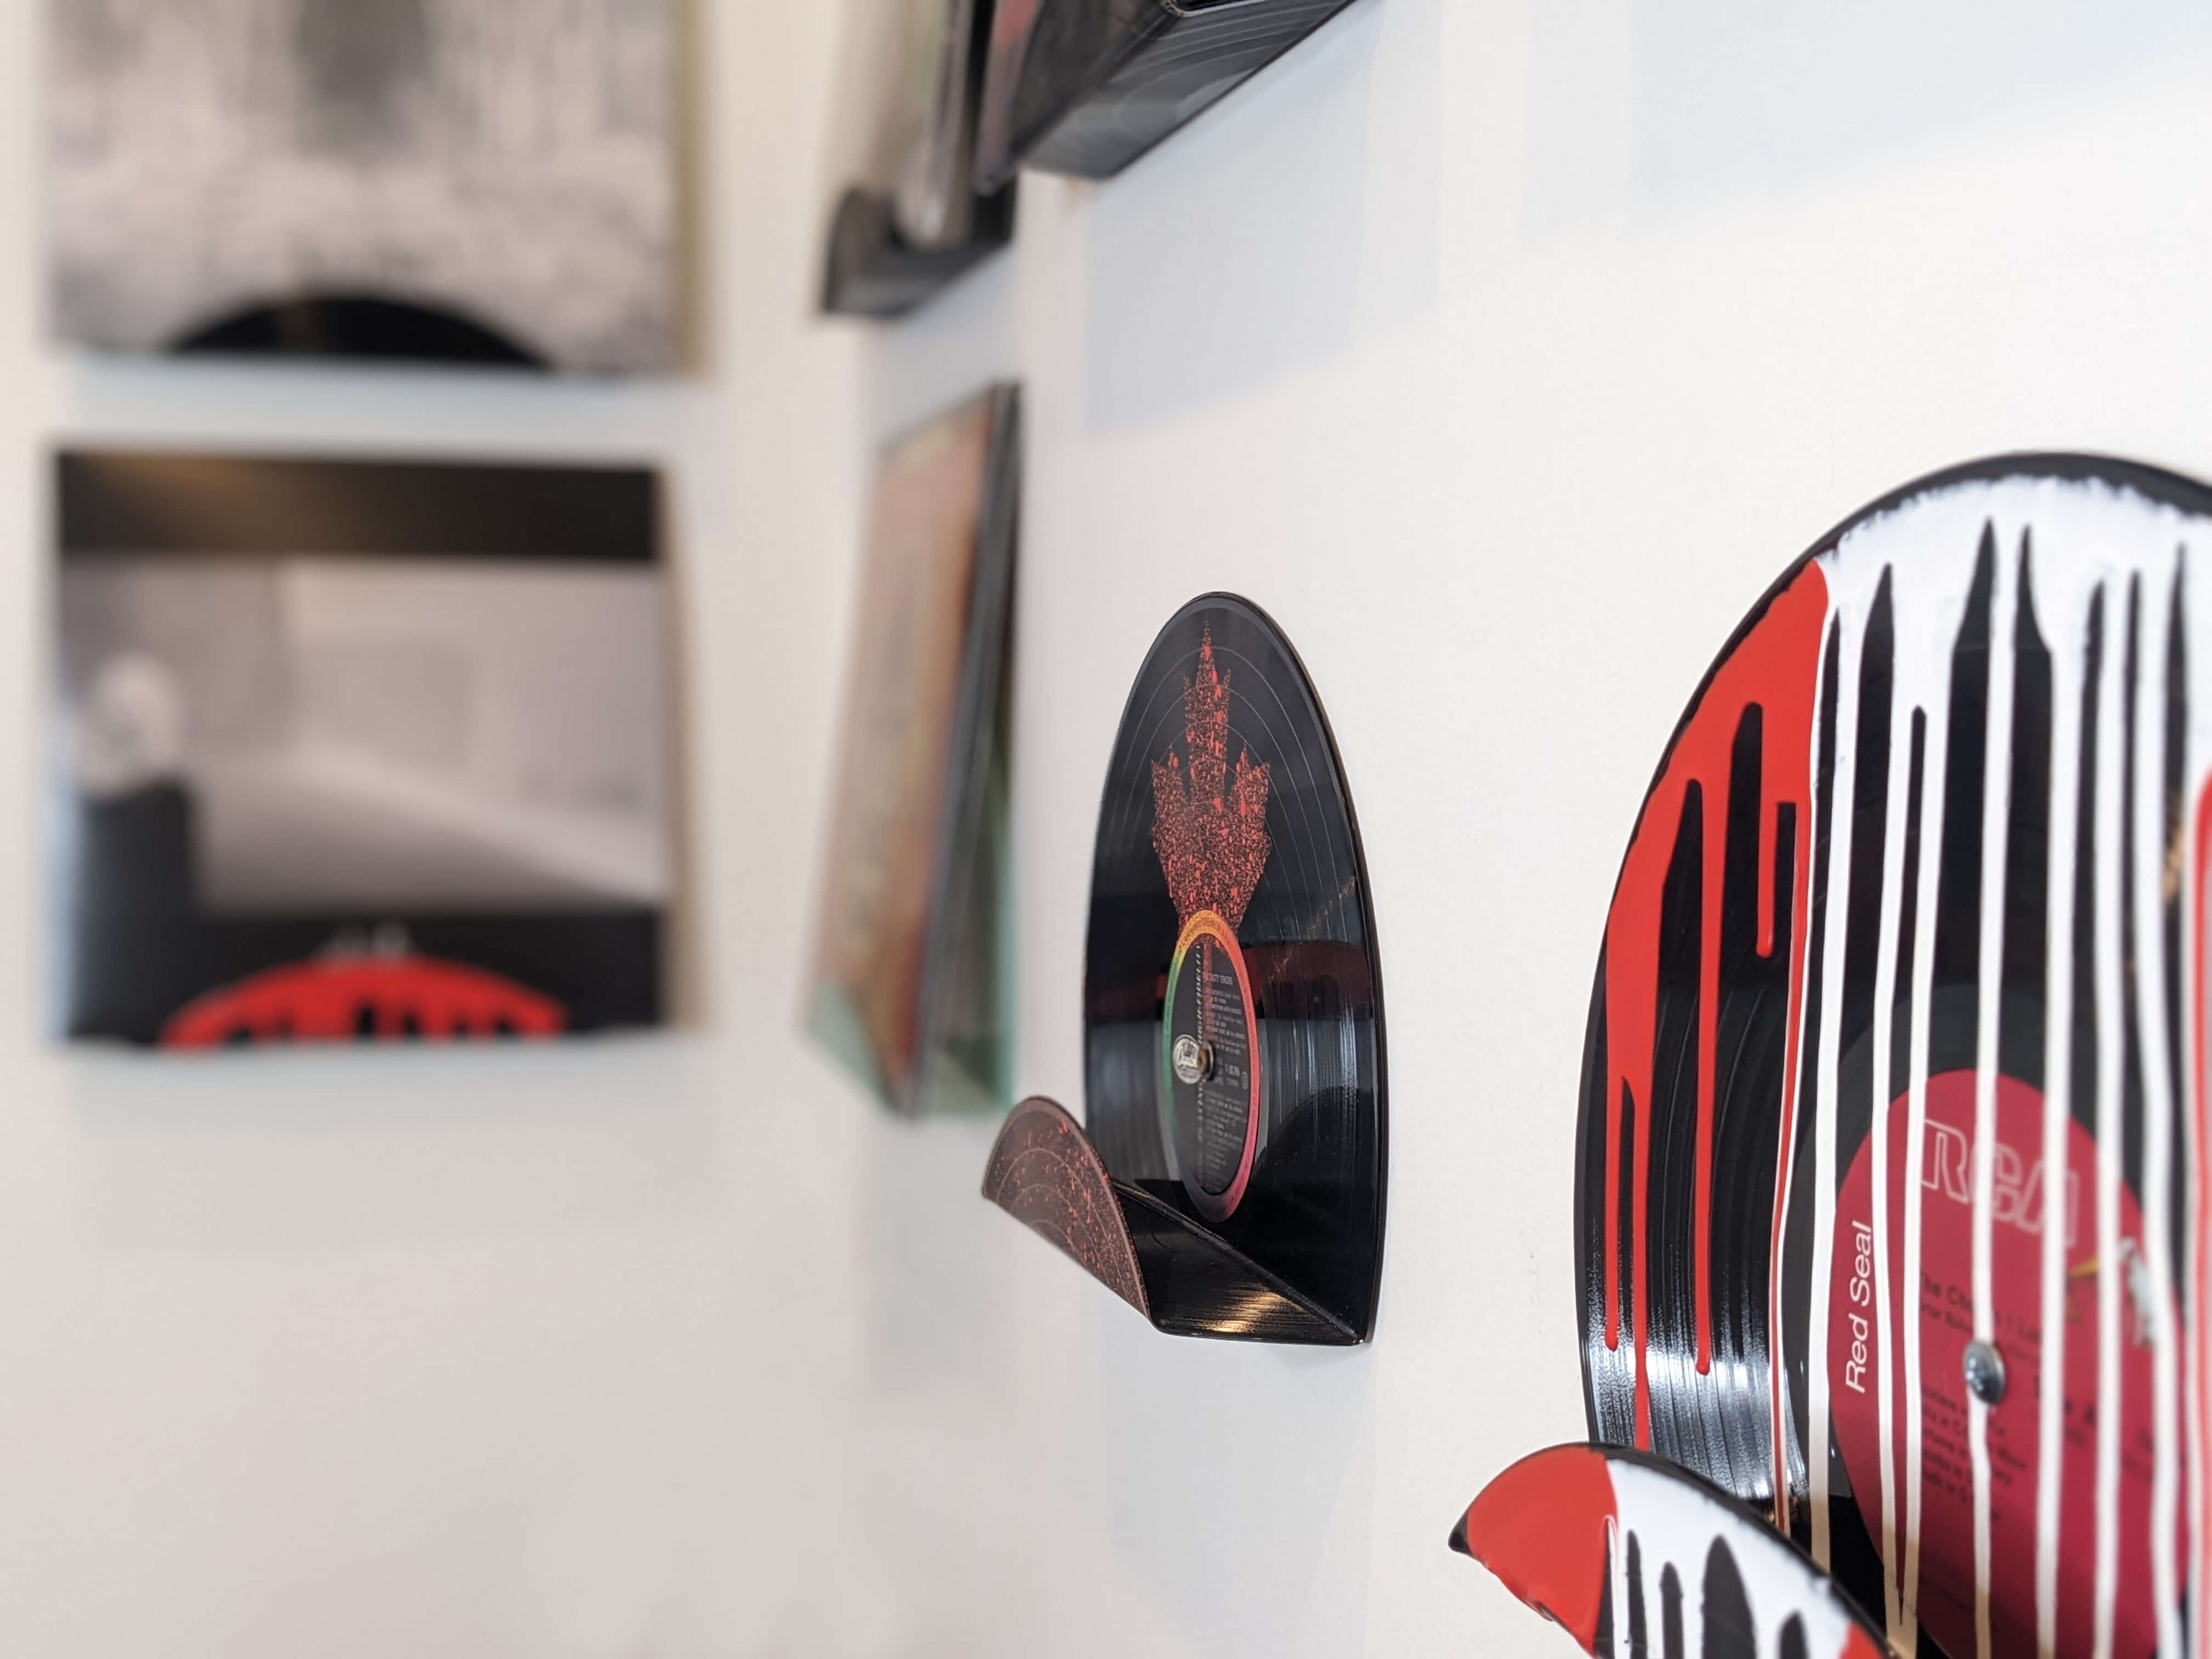 Upcycled vinyl record displays featuring Solstafir and Sum 41 with a maple leaf in 514 RPM store's living room